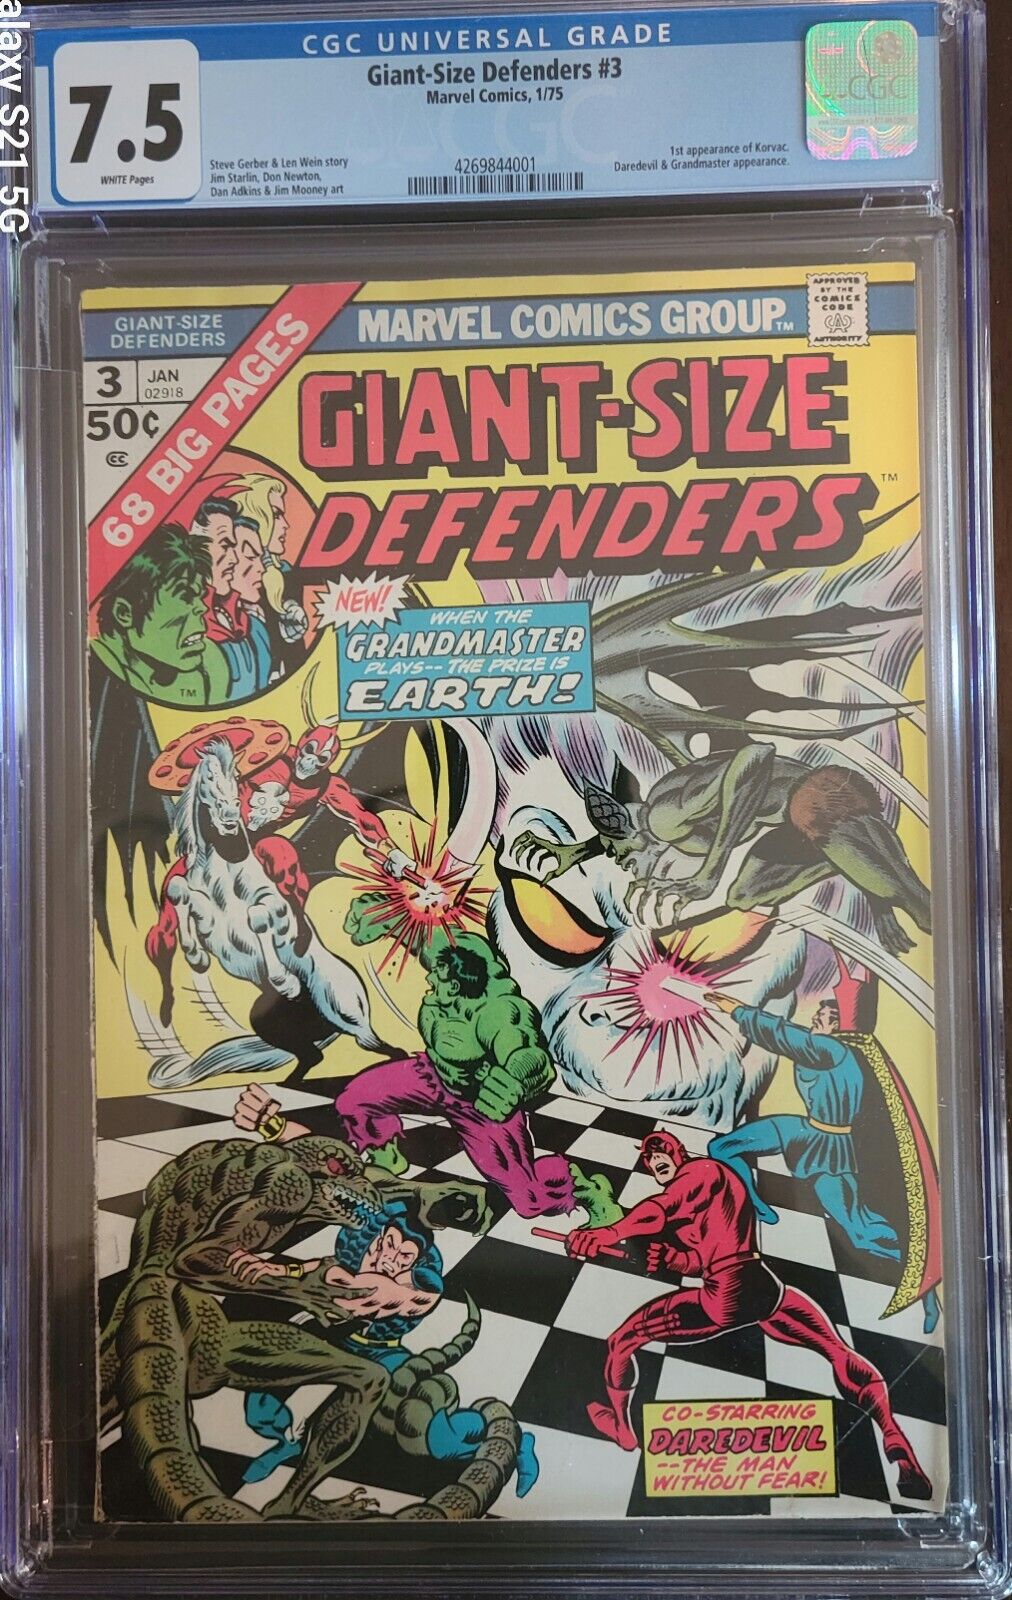 Giant-Size Defenders #3 CGC GRADED 7.5 - 1st Appearance Of Korvac